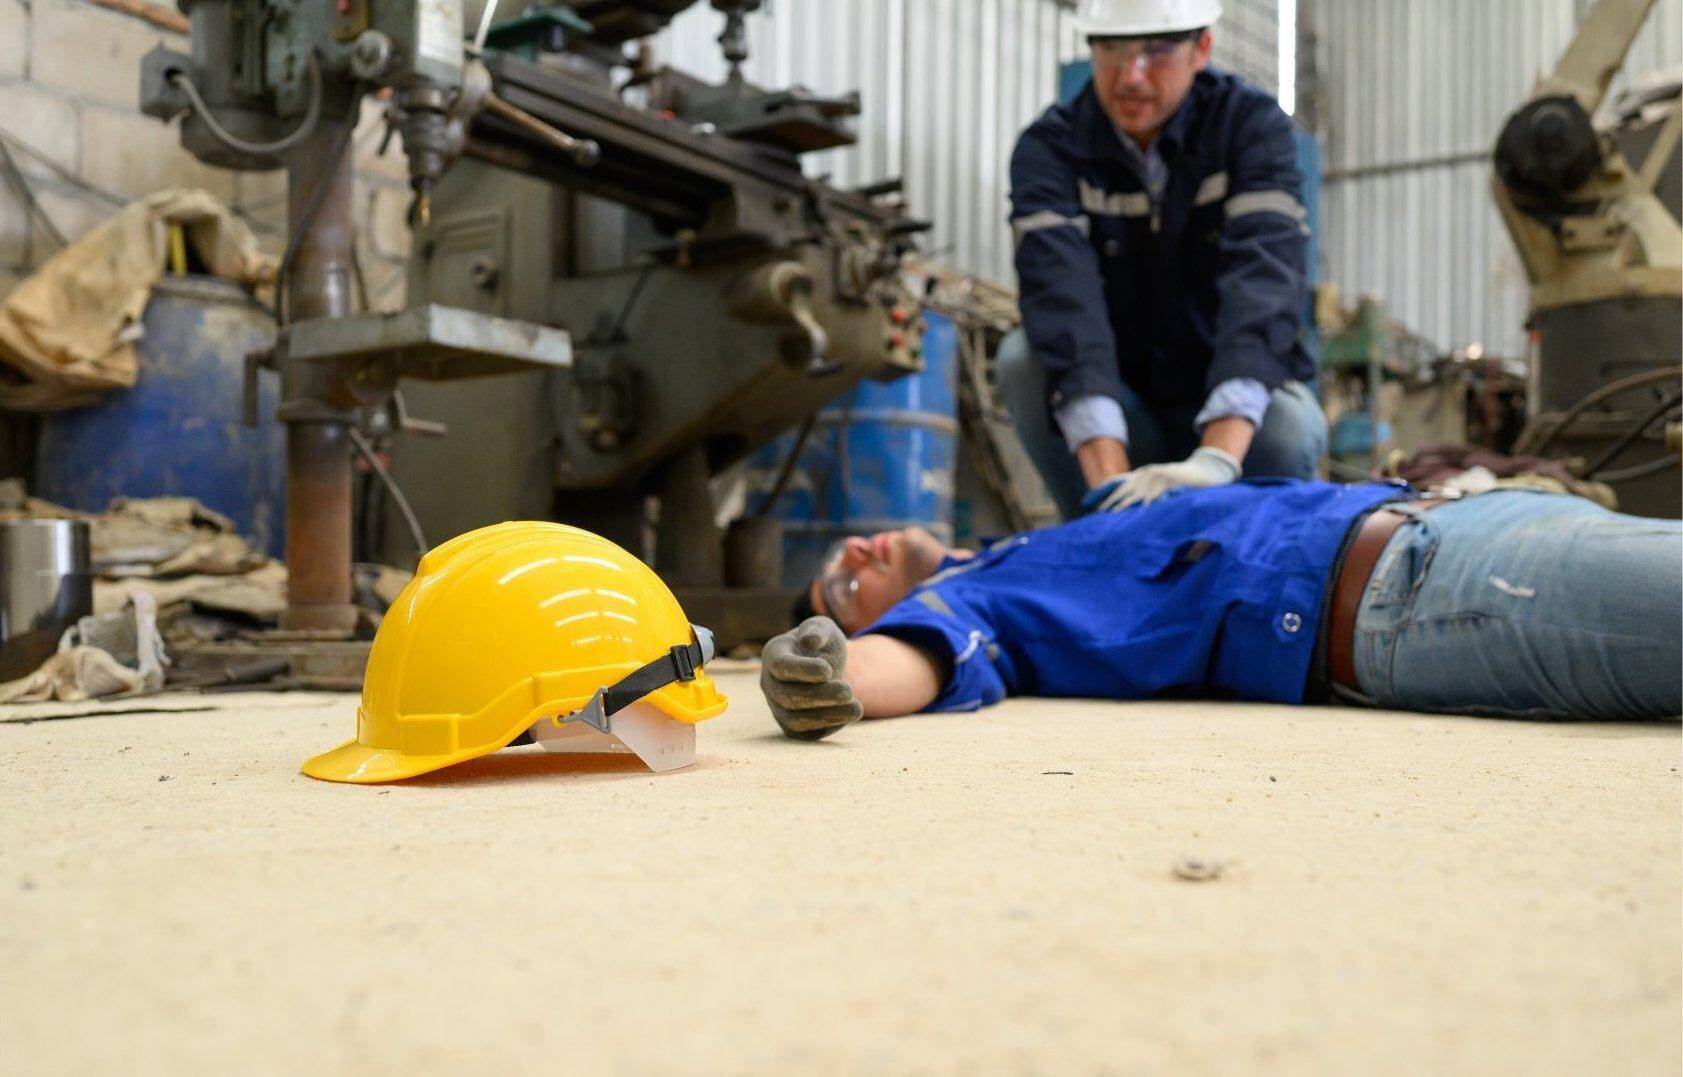 An unconscious man who has been injured on the job who will file for workers compensation in Grovetown, Georgia